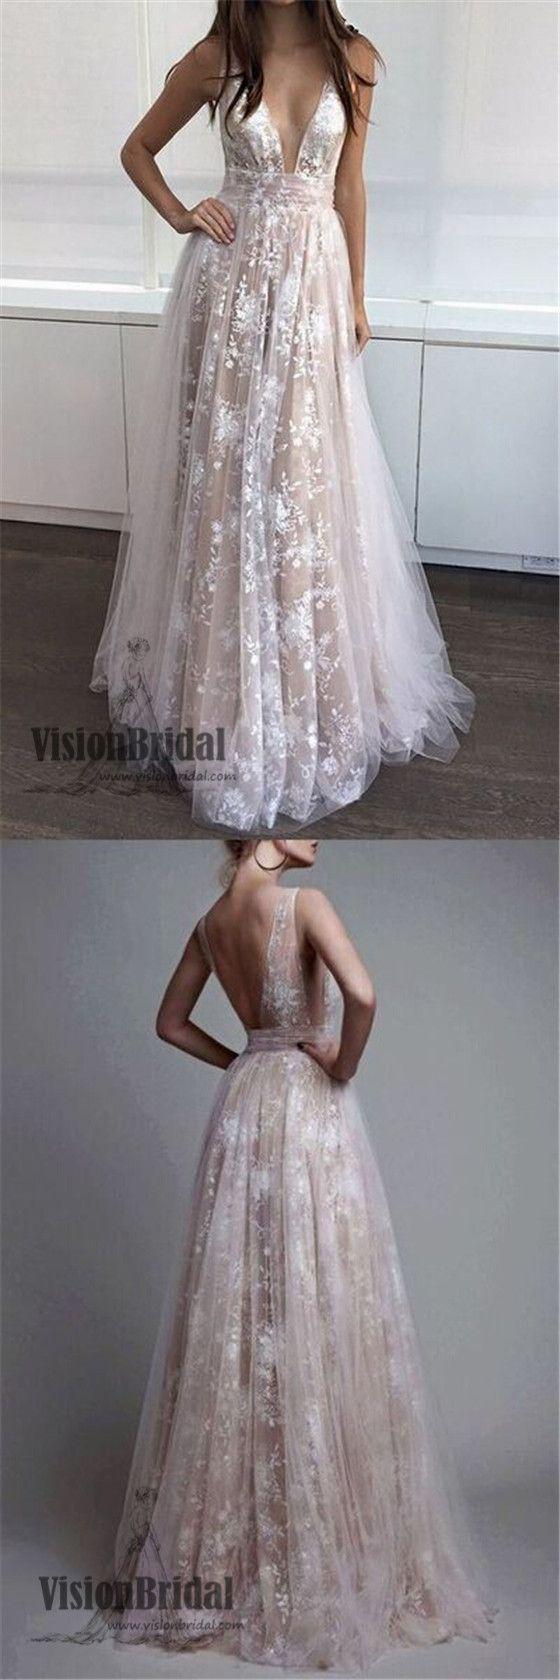 Wedding - Deep V-Neck Lace Embroidery Tulle With Sequin Petticoat Long Prom Dress, Prom Dresses, VB0269